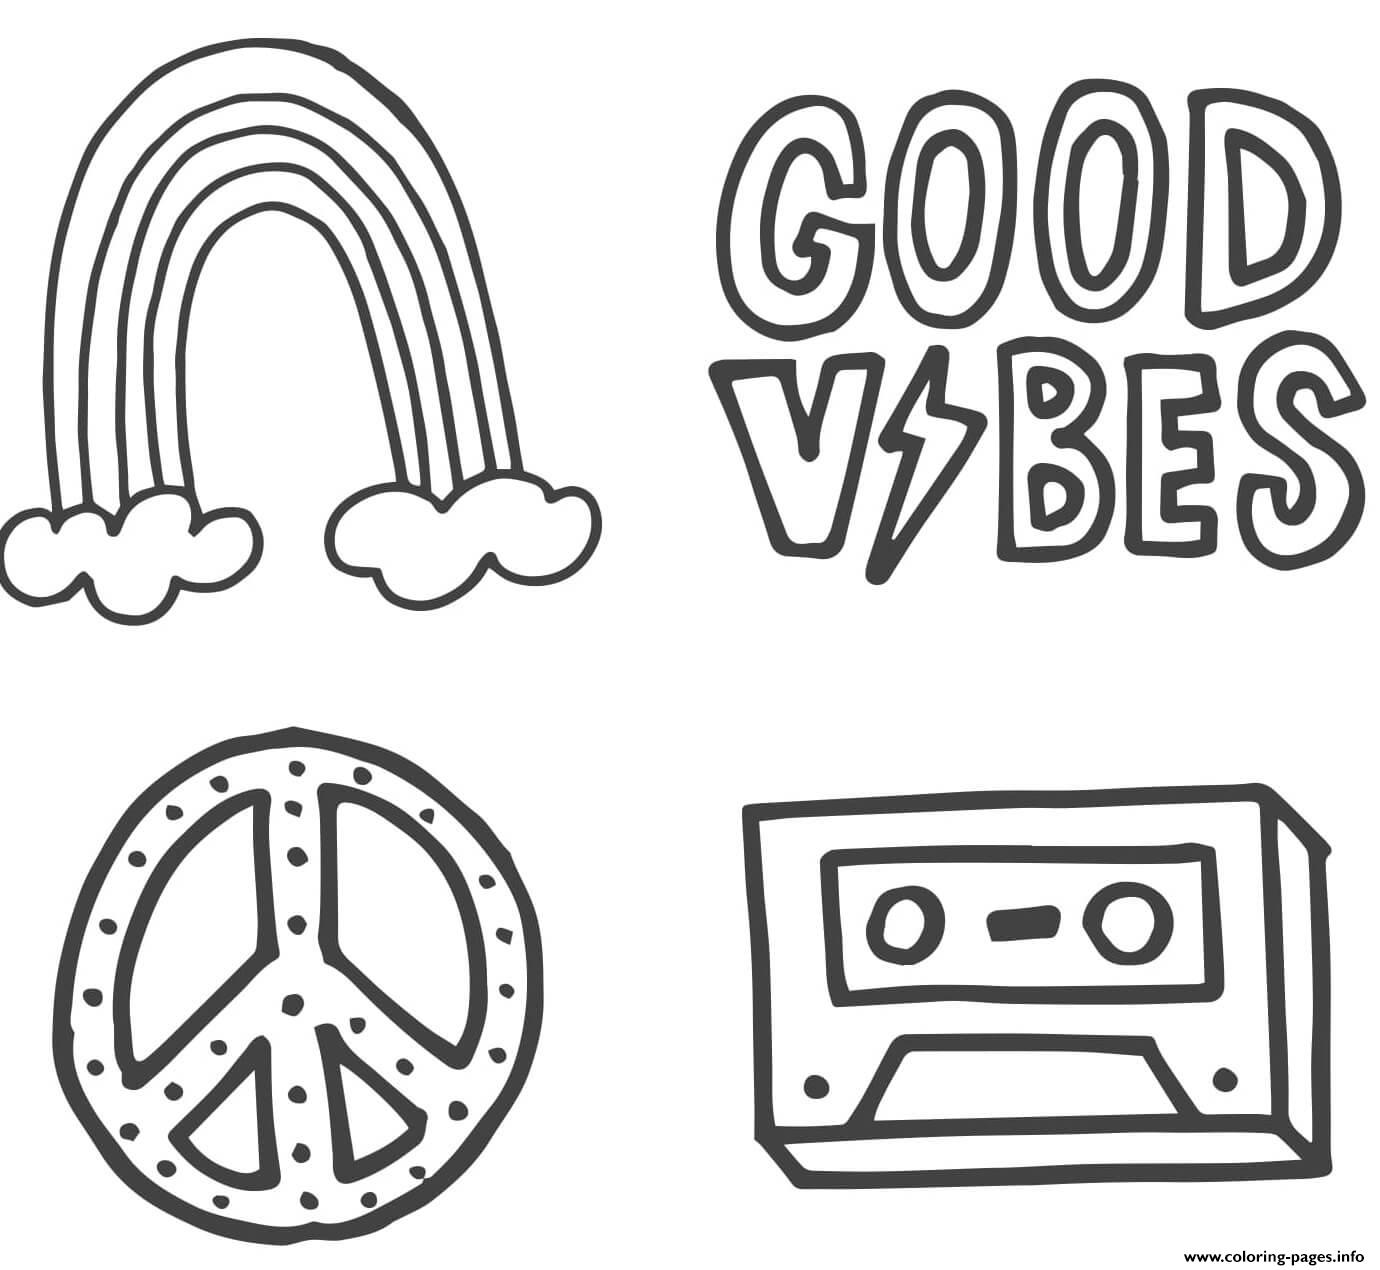 Vsco Girl Good Vibes Peace 1 Coloring page Printable